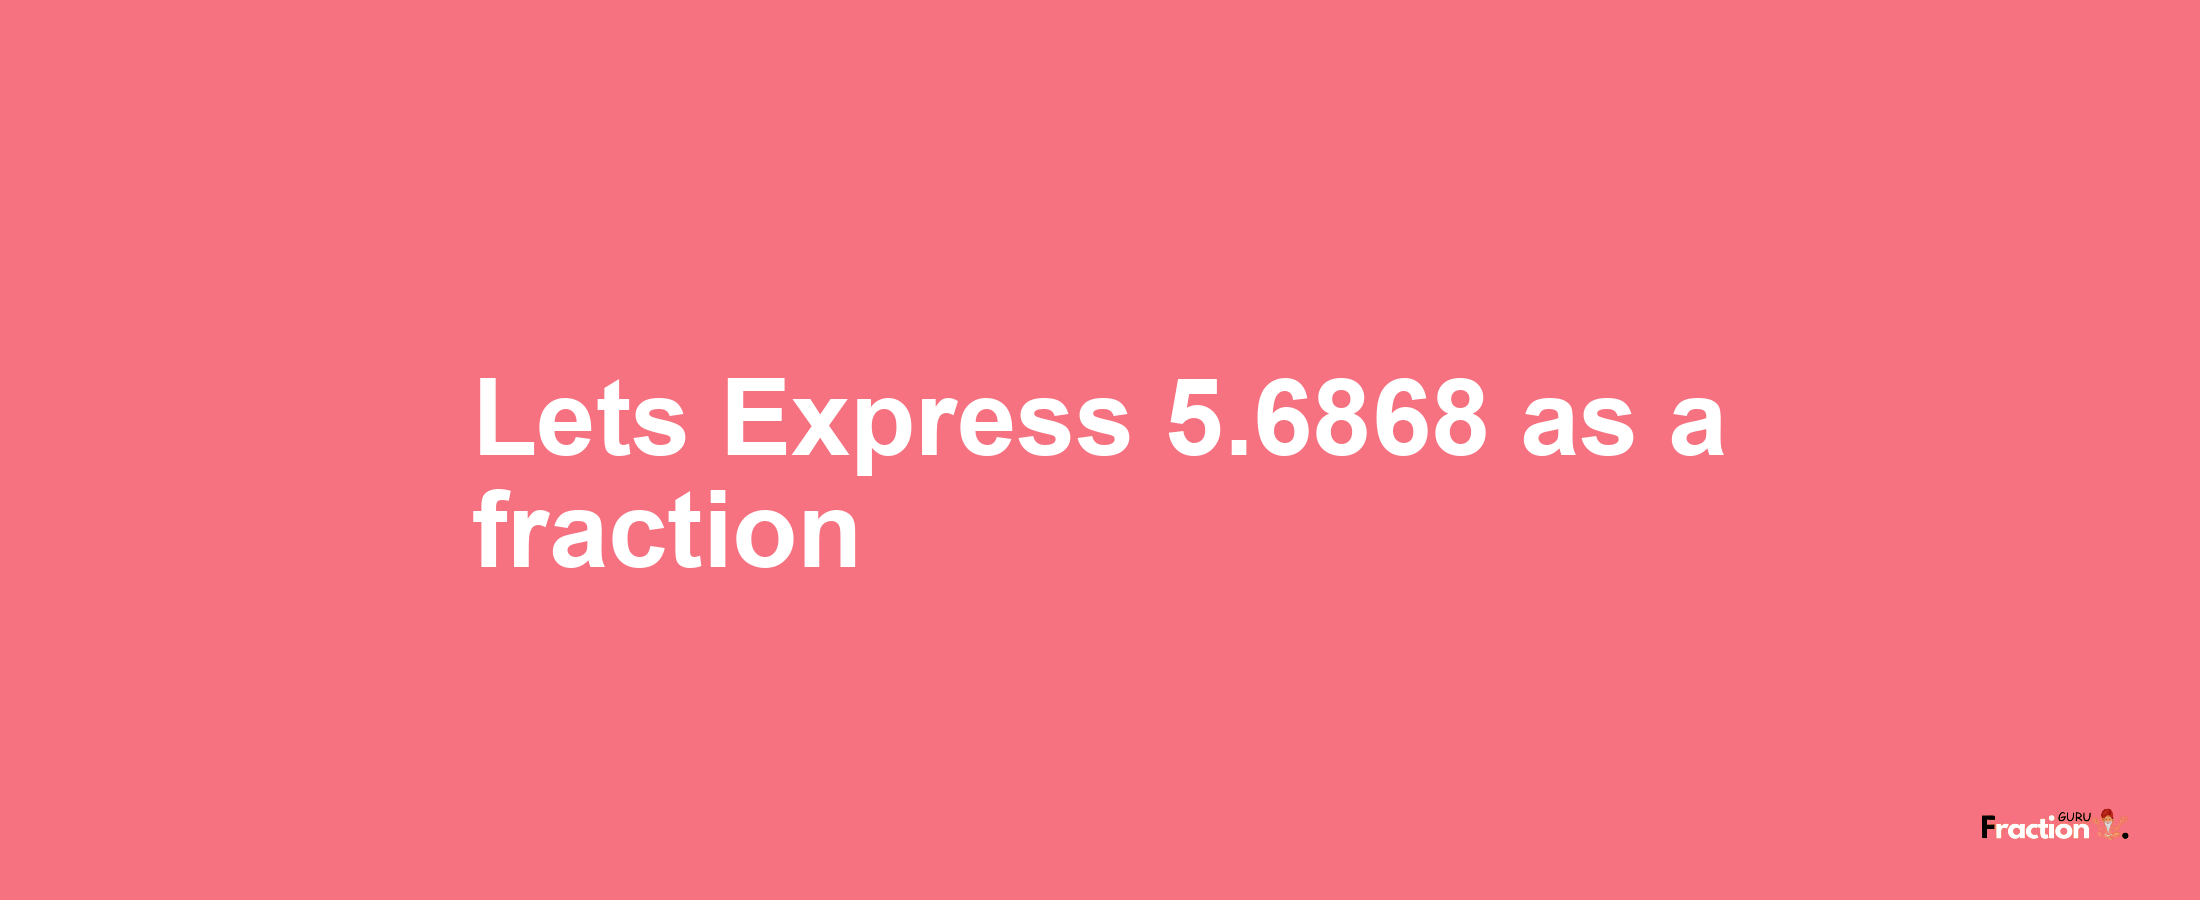 Lets Express 5.6868 as afraction